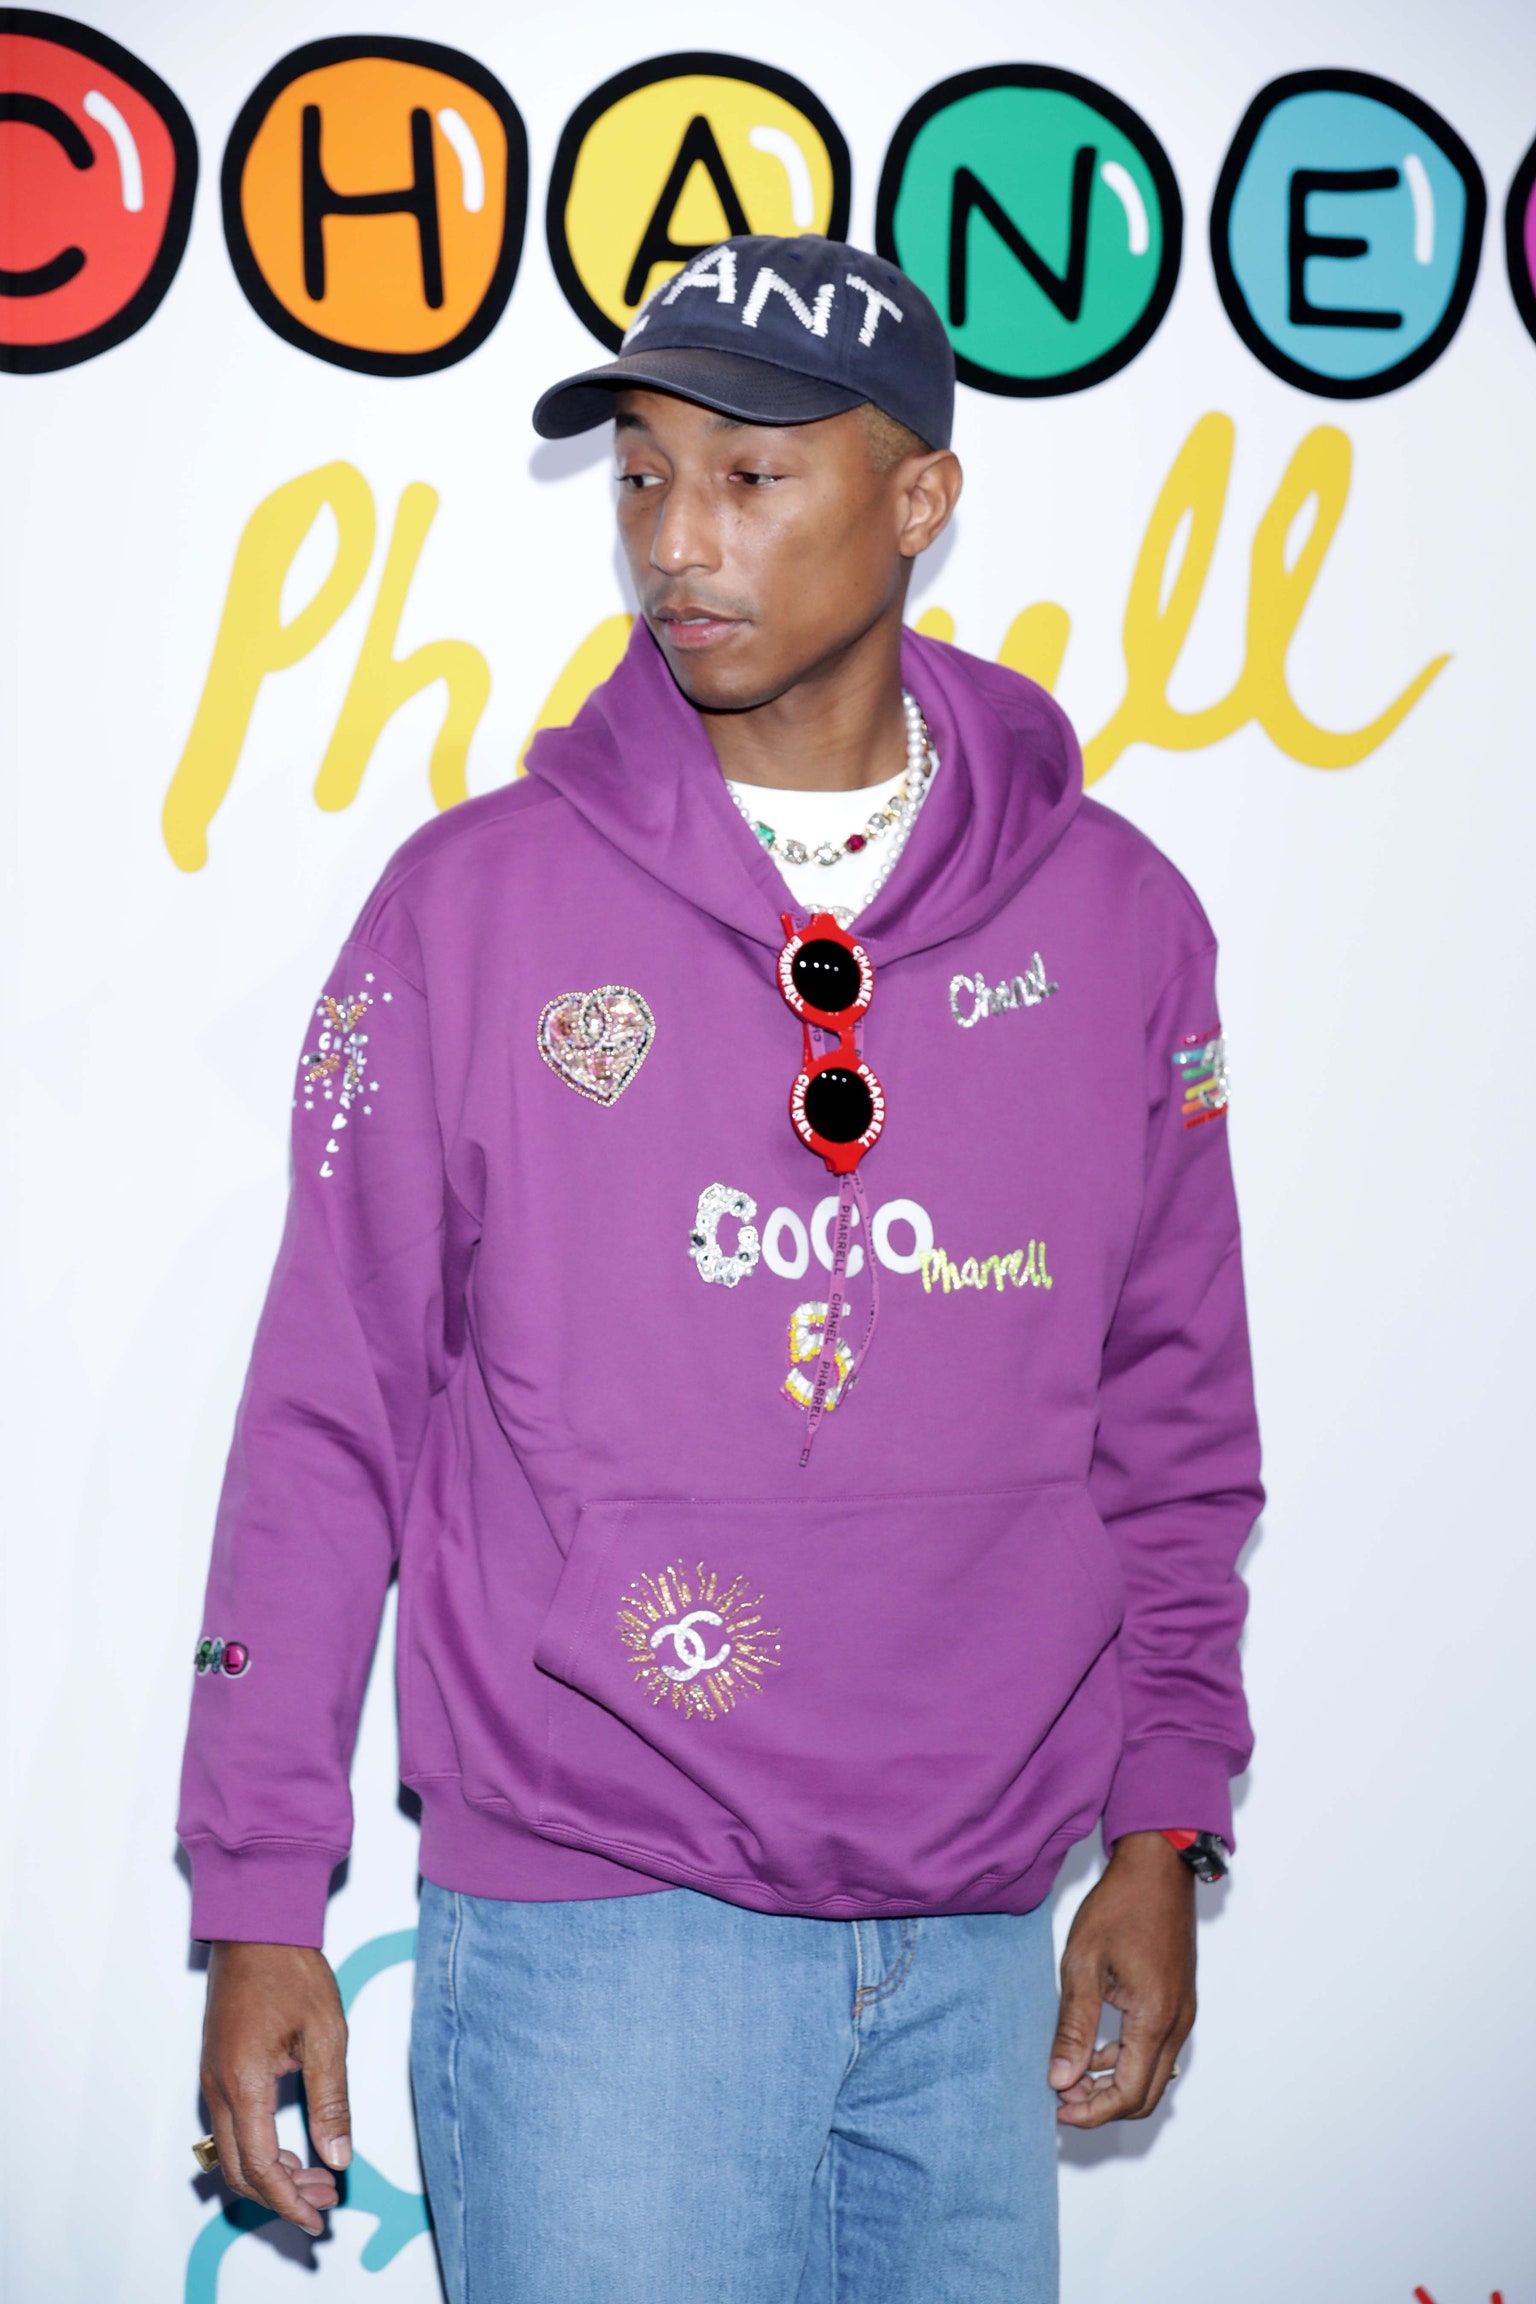 Pharrell Launches Capsule Collection CHANEL PHARRELL At Seoul 2019   The Neptunes 1 fan site all about Pharrell Williams and Chad Hugo